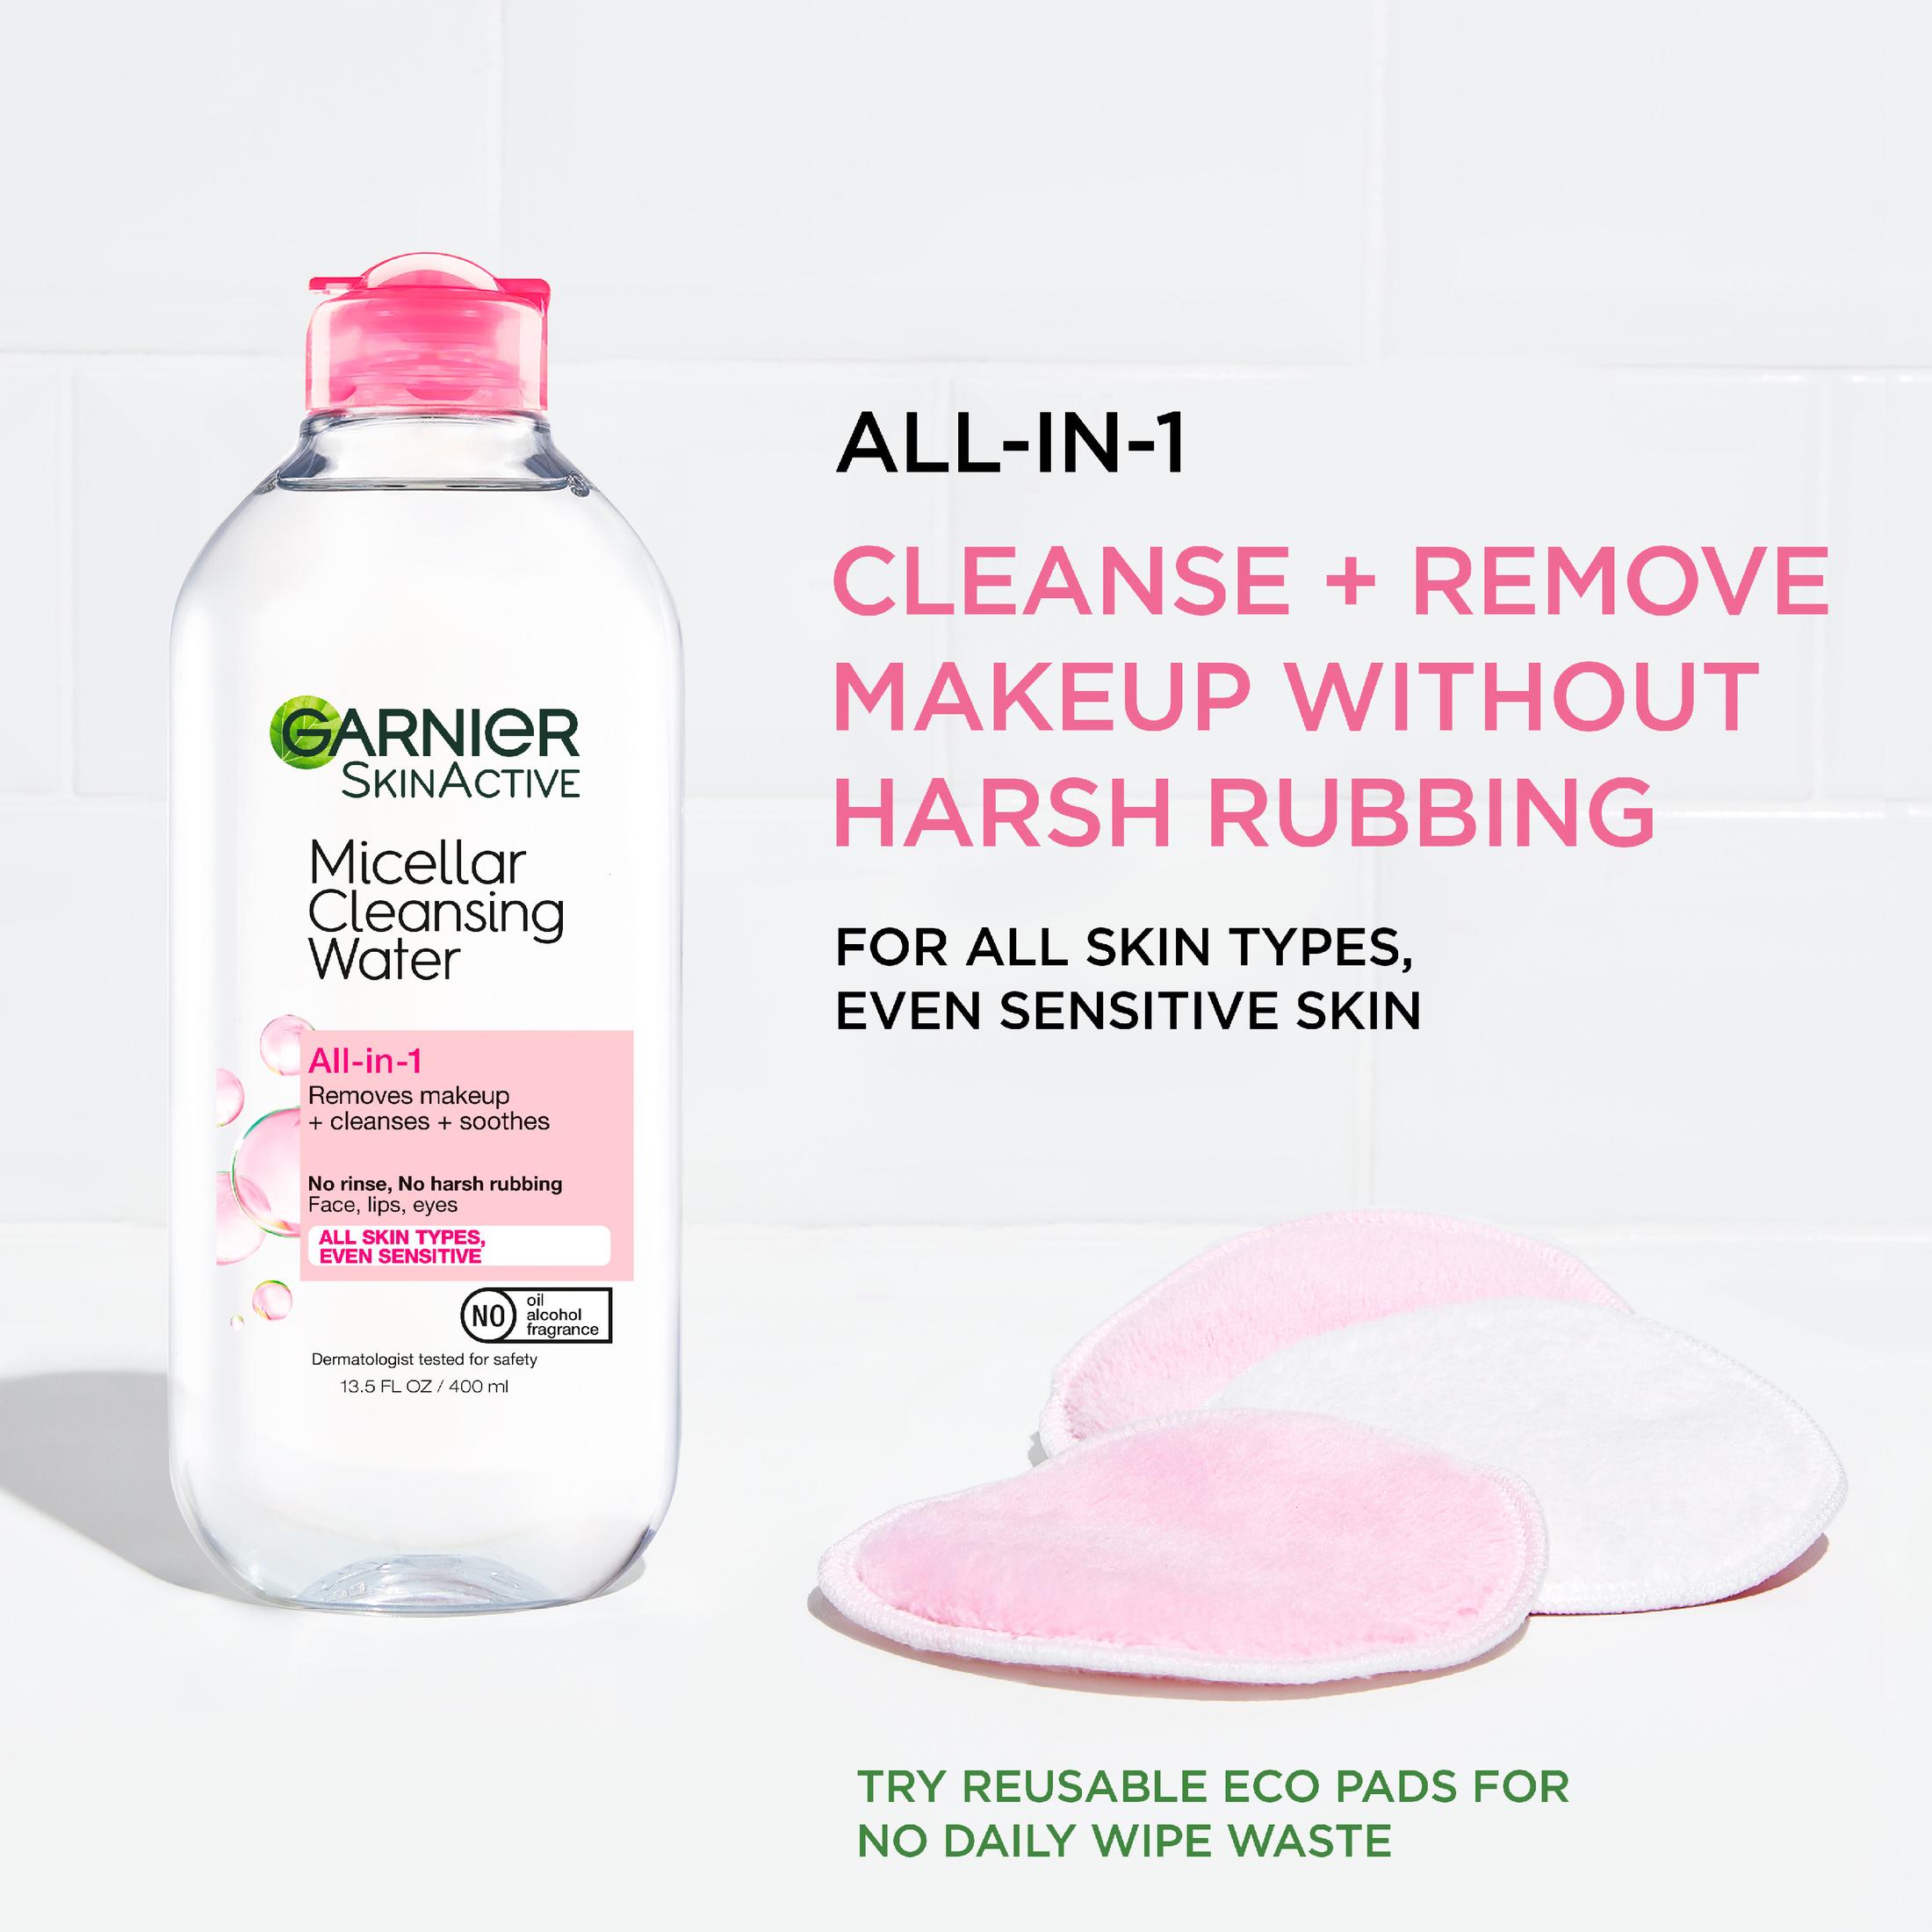 Garnier SkinActive Micellar Cleansing Water All in 1 Makeup Remover Cleanses, 13.5 fl oz - image 4 of 10